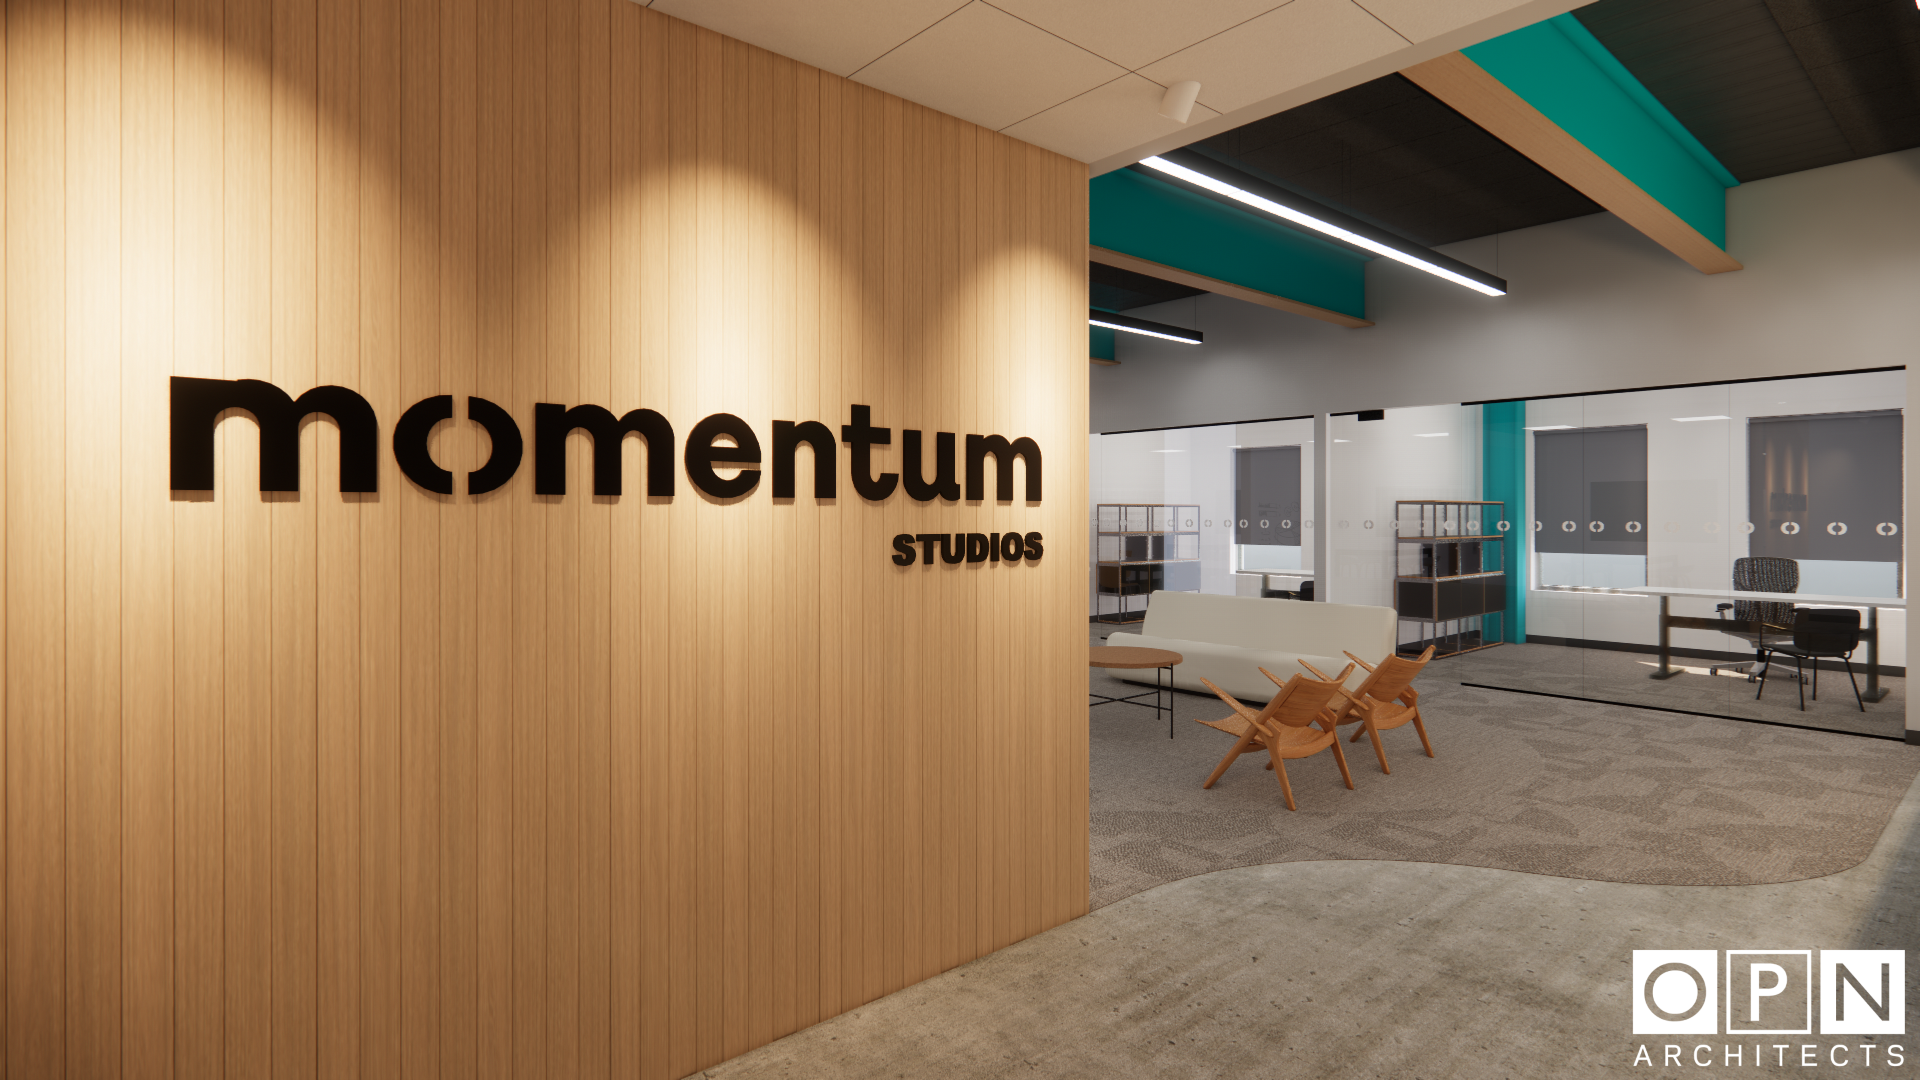 ‘At the intersection of all types of challenges’: Jeff Reed shares vision for new consulting company Momentum Studios